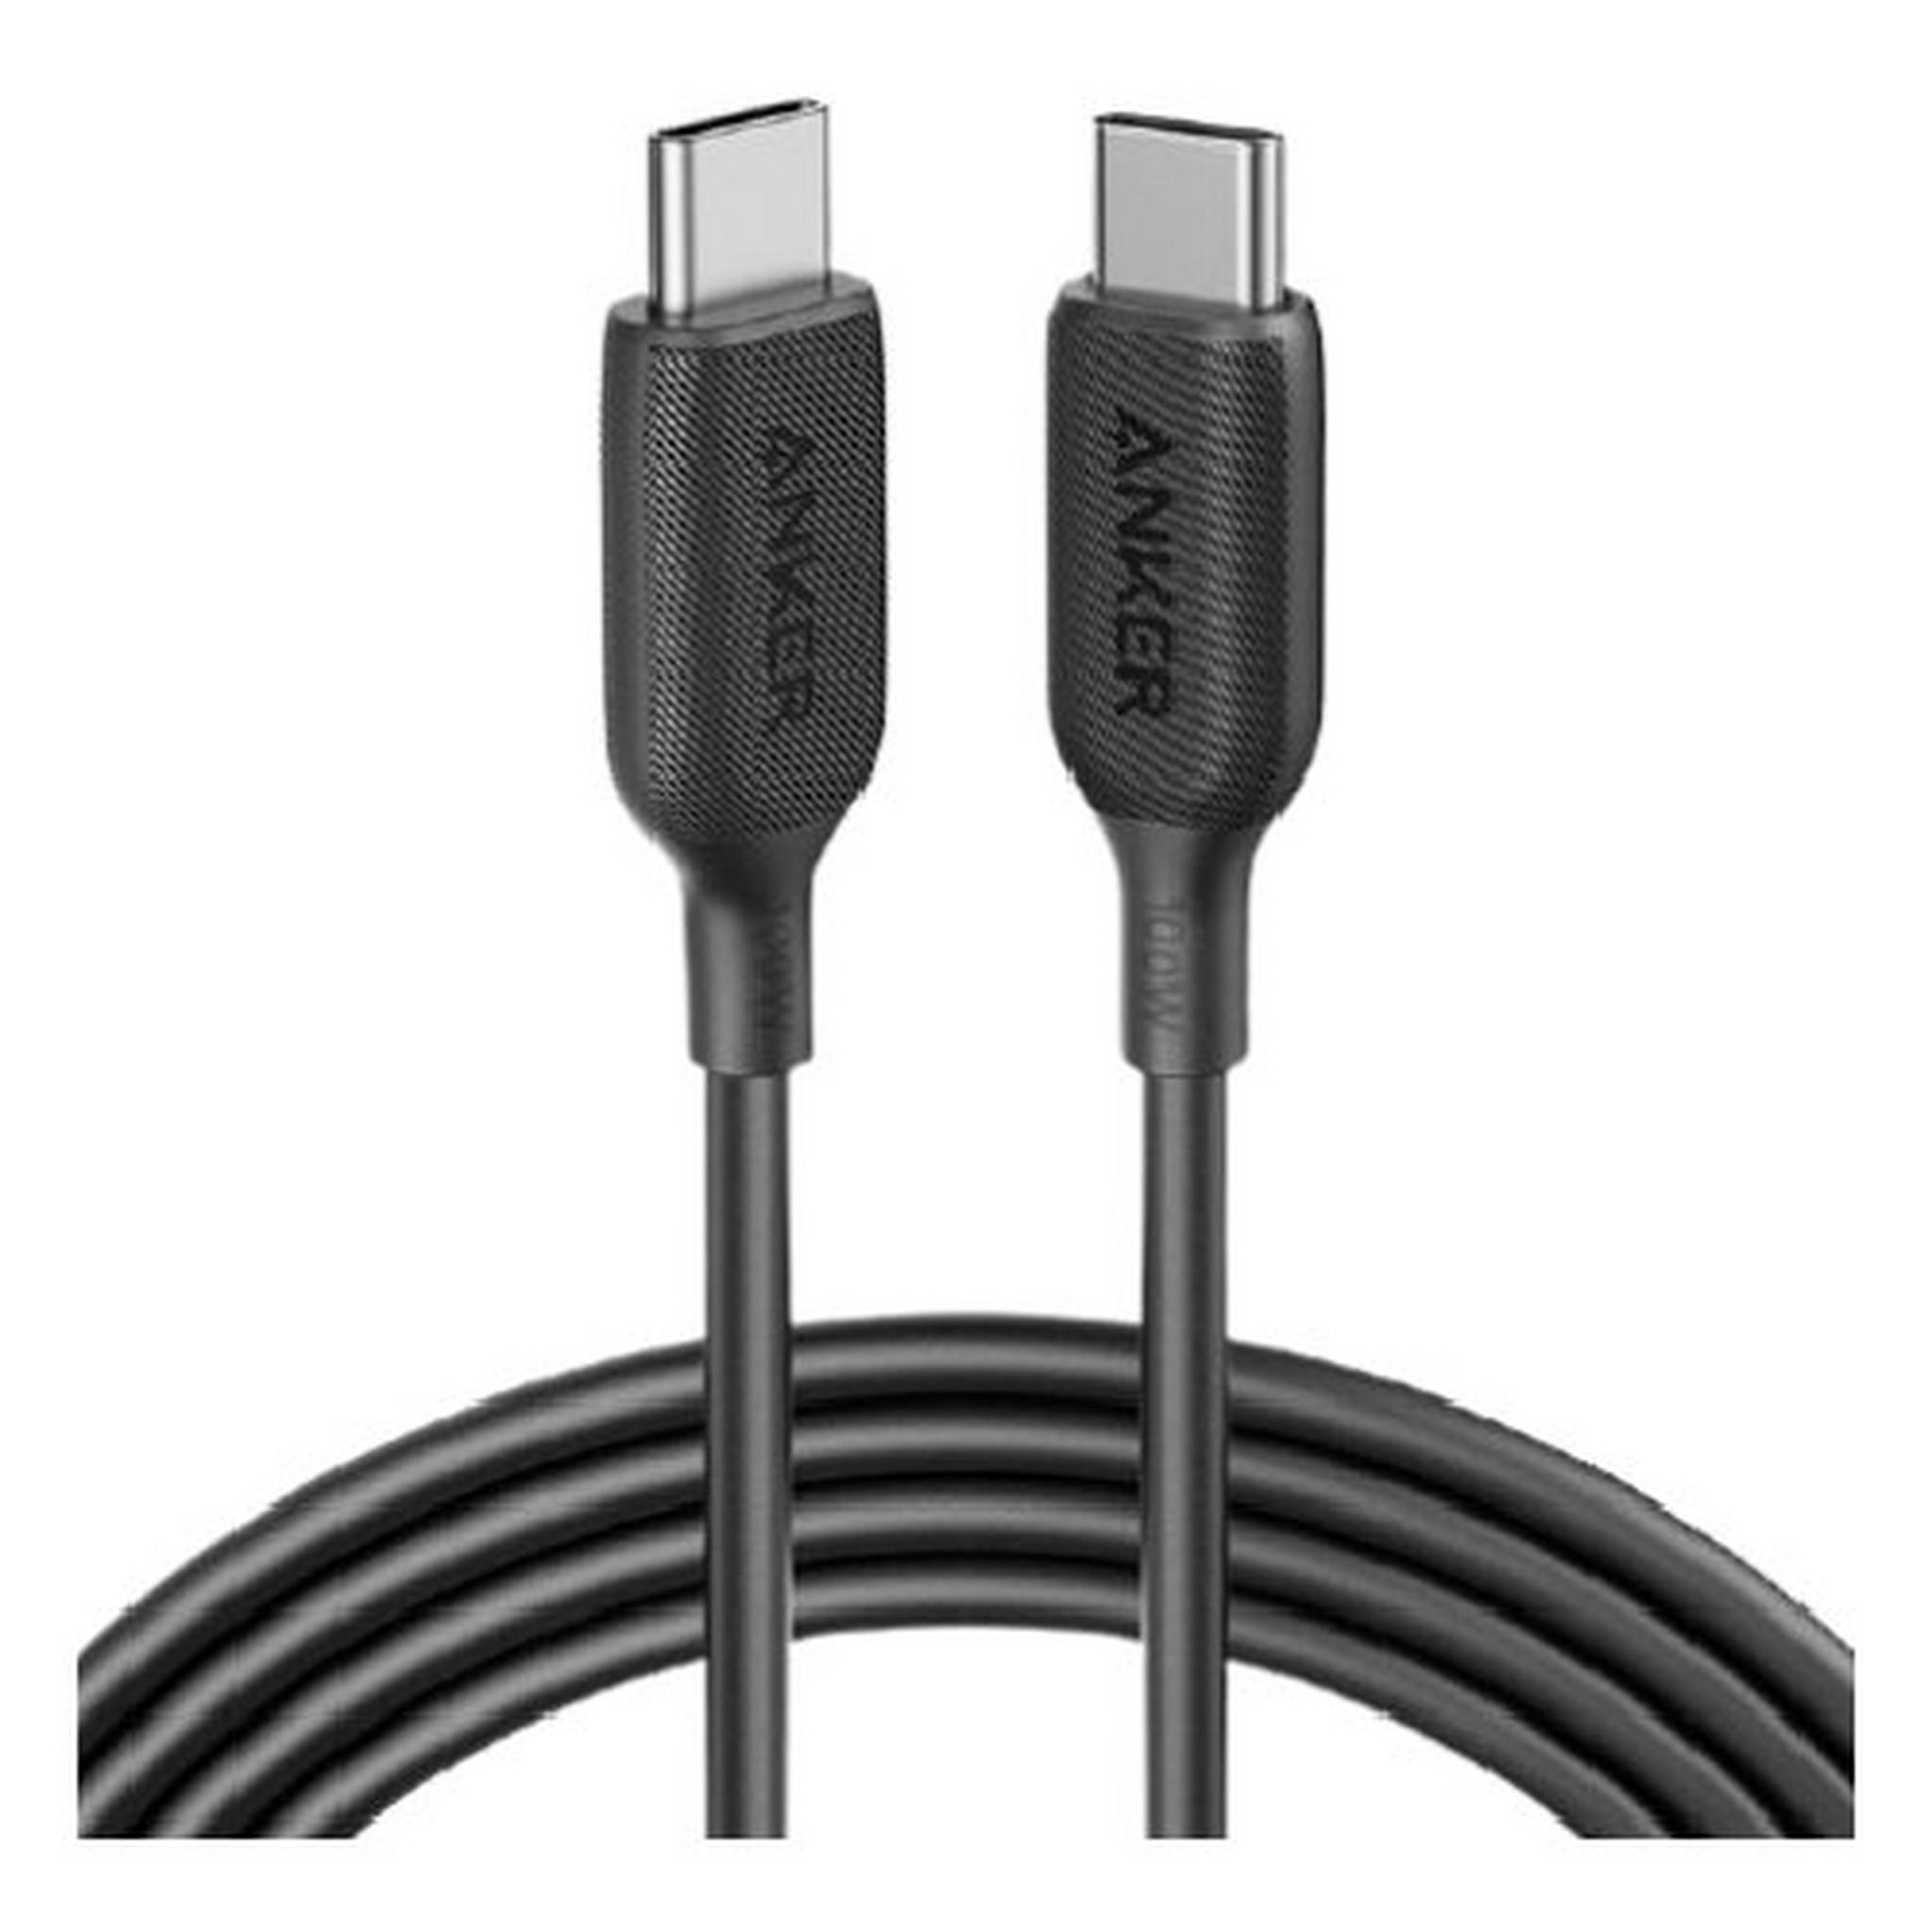 Anker PowerLine III USB-C to USB-C Cable 1.8 M – Black